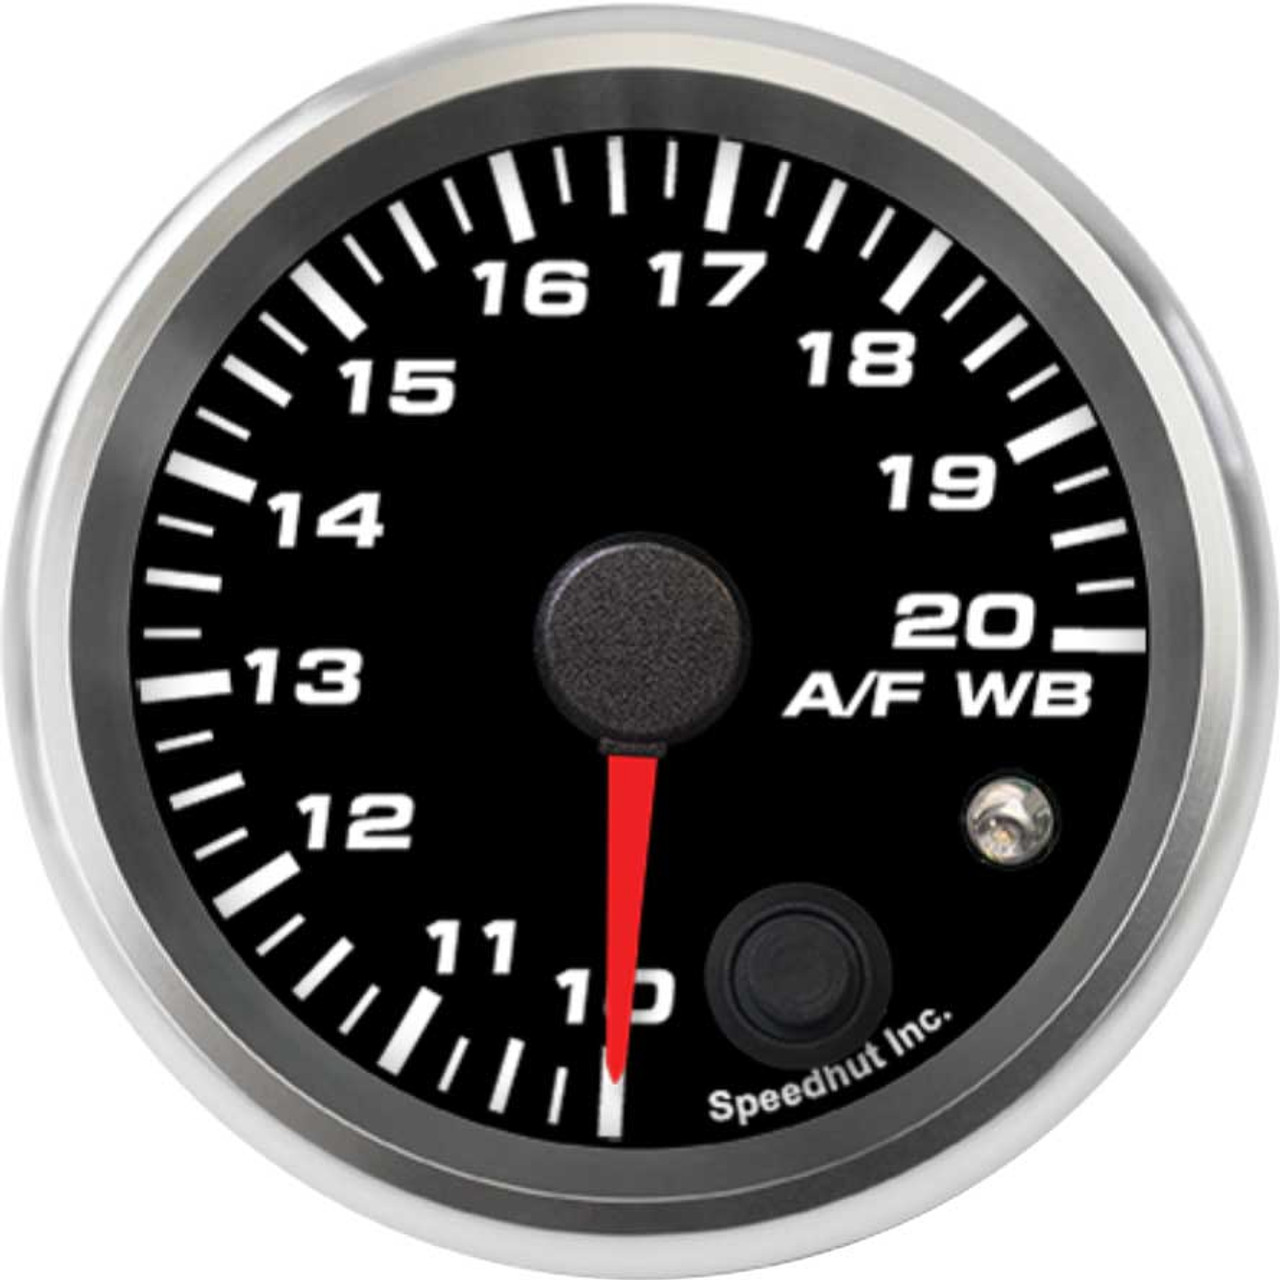 2-5/8" Air/Fuel Wide Band Gauge 10-20 (w/ warning) (FOR SPARTAN)